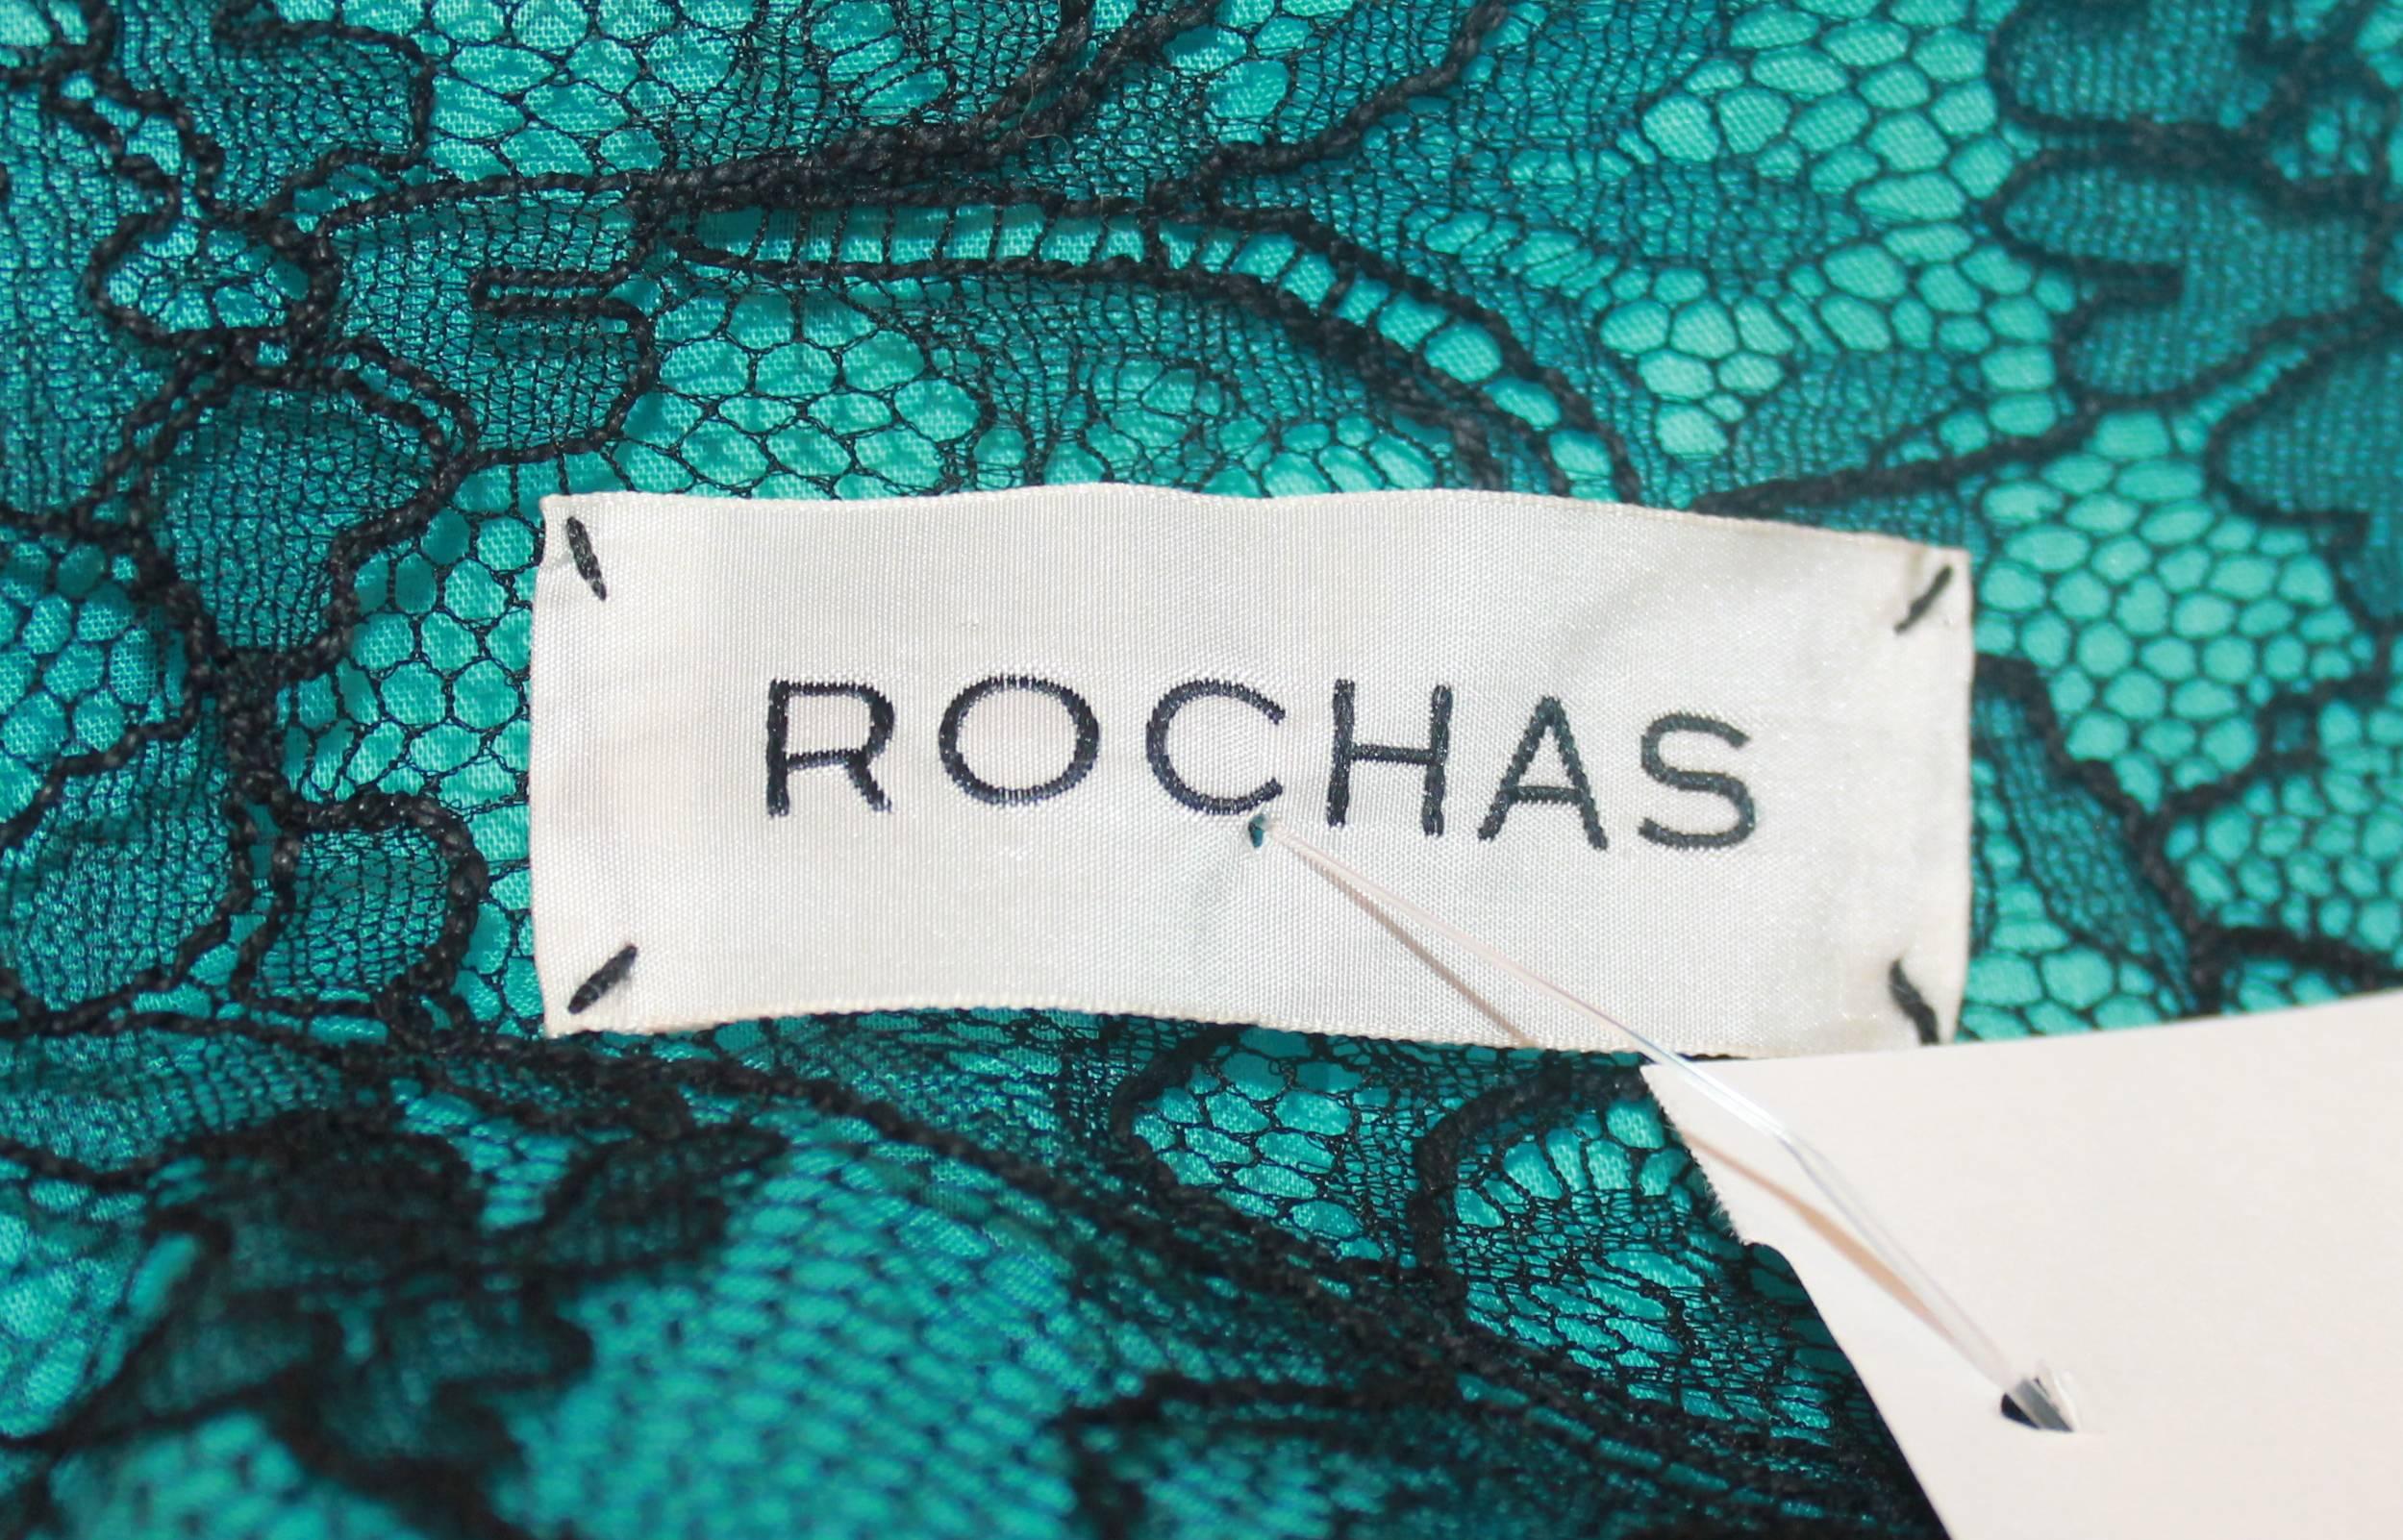 Rochas Black & White Long Jacket w/ Aqua Stitching & Lace Cutout Bottom - 6 In Excellent Condition For Sale In West Palm Beach, FL